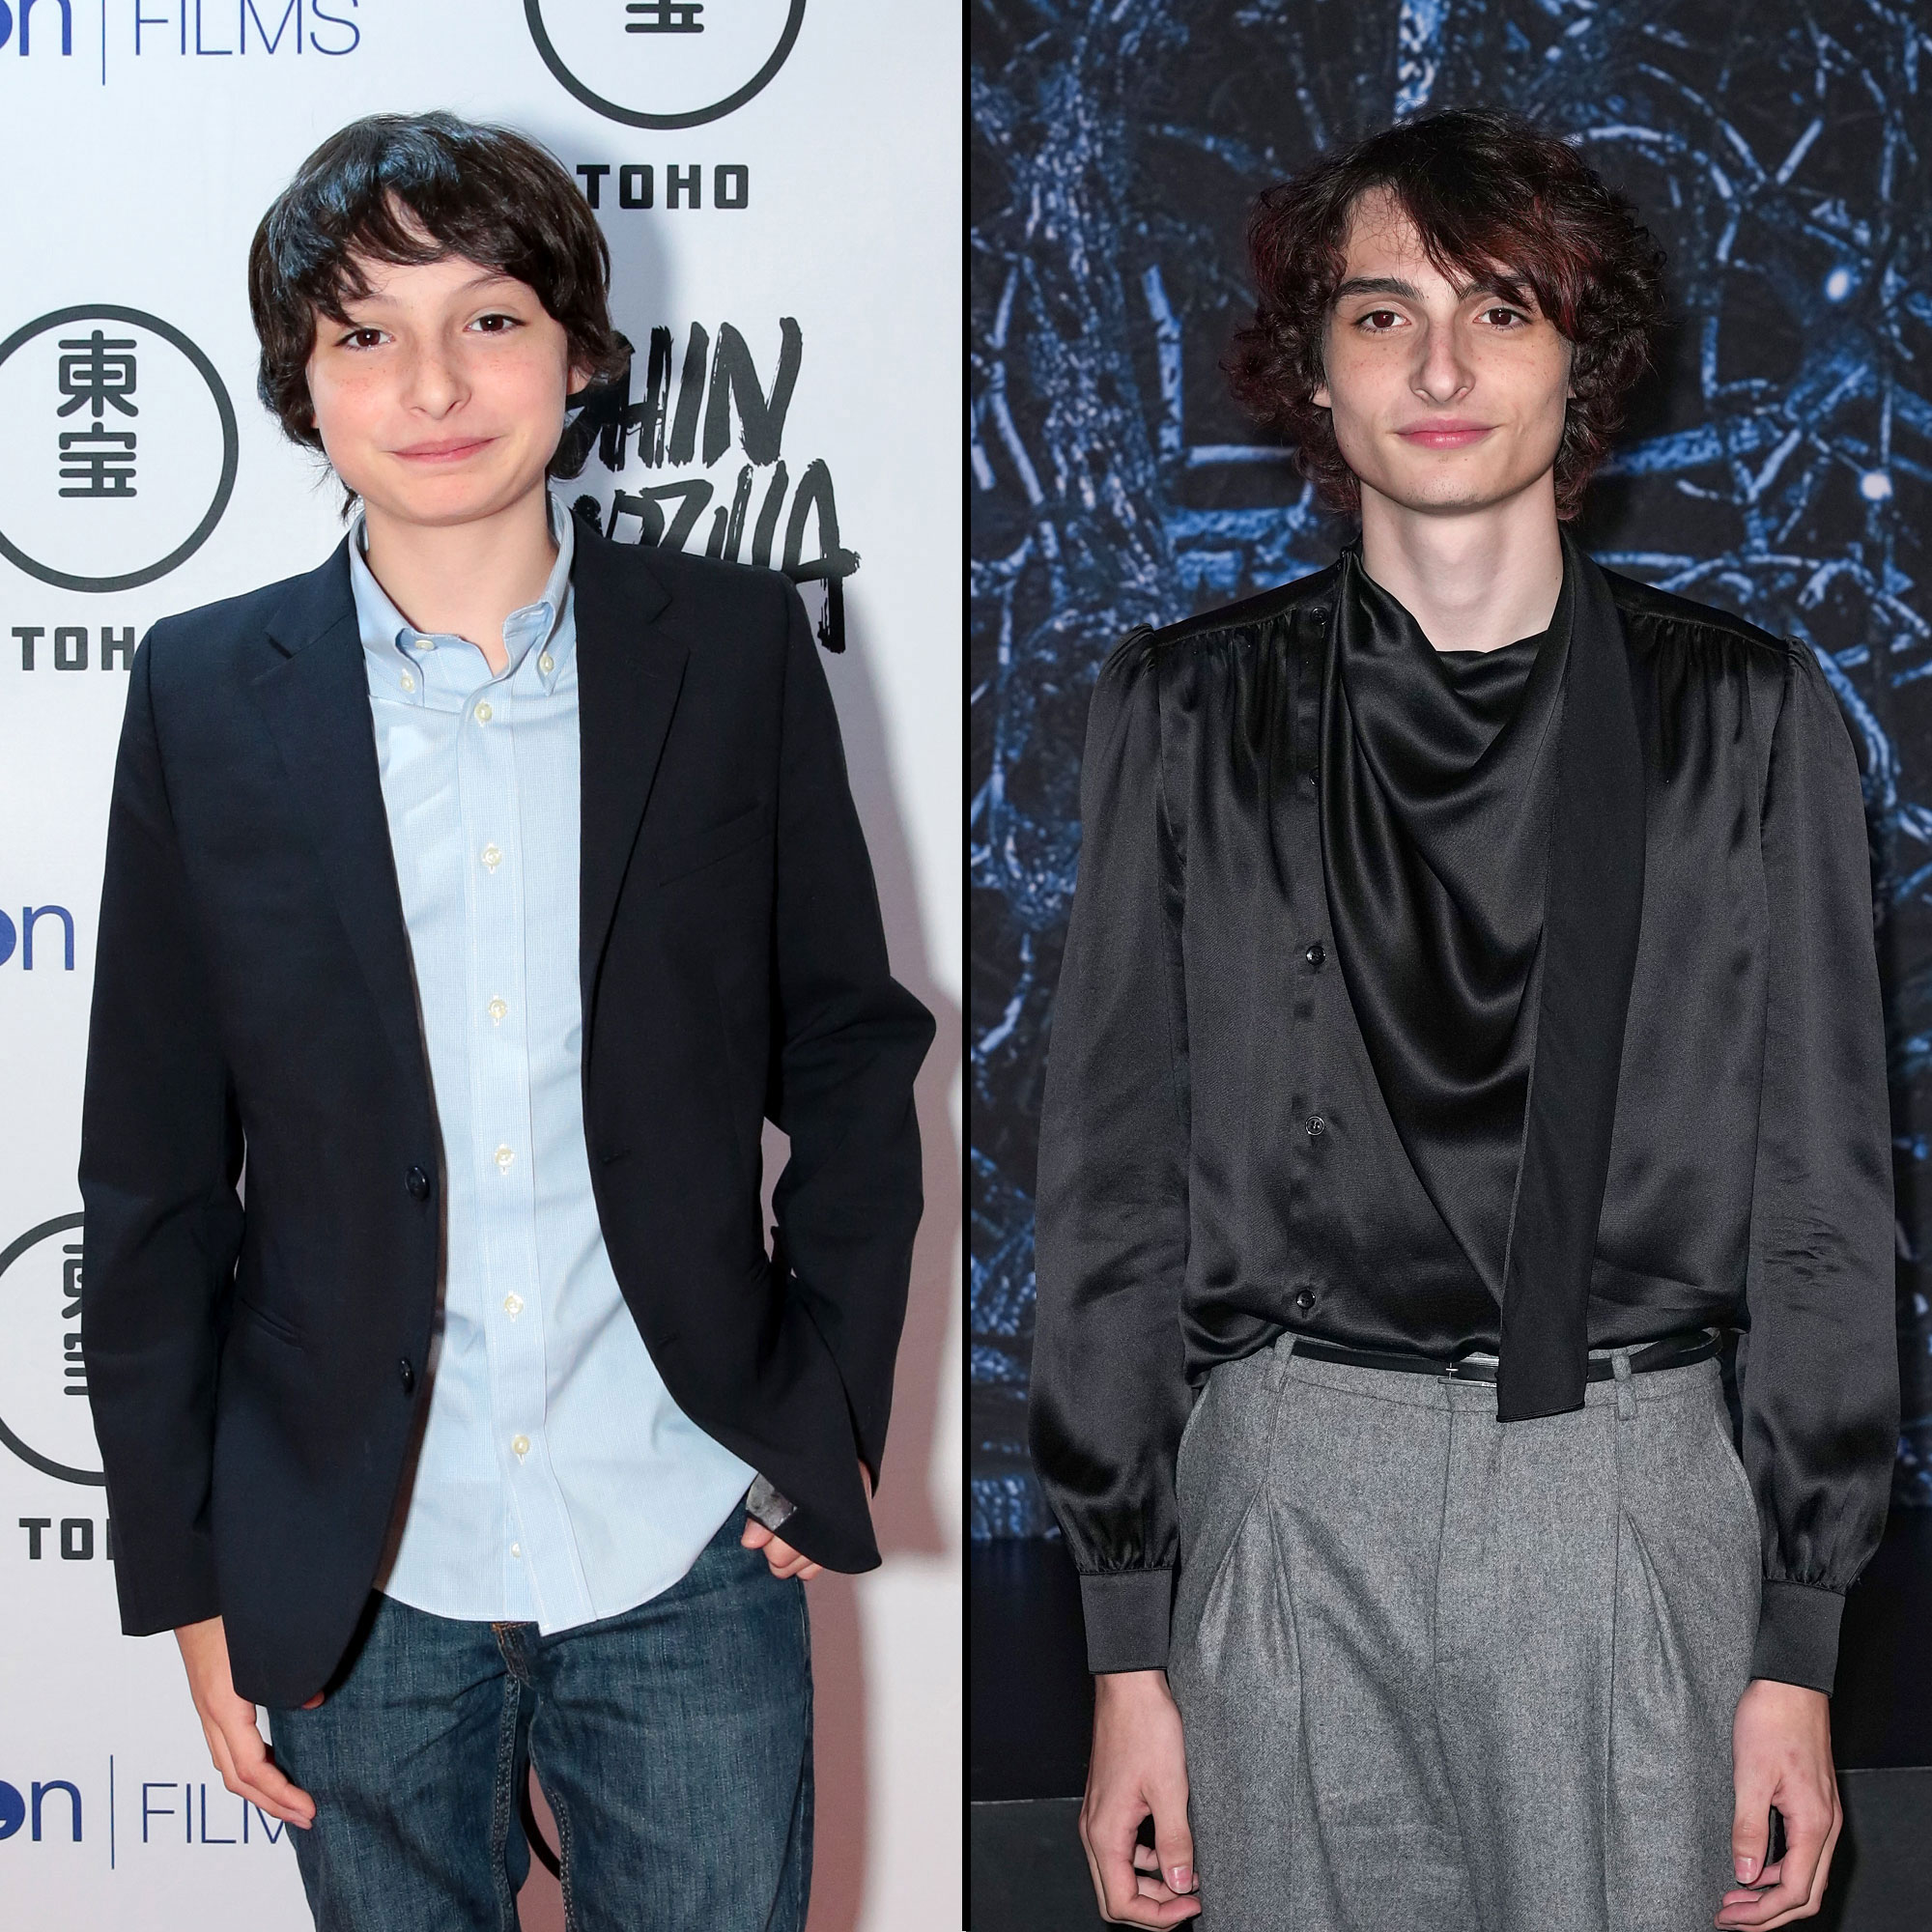 Stranger Things cast for season 4, List of characters and actors